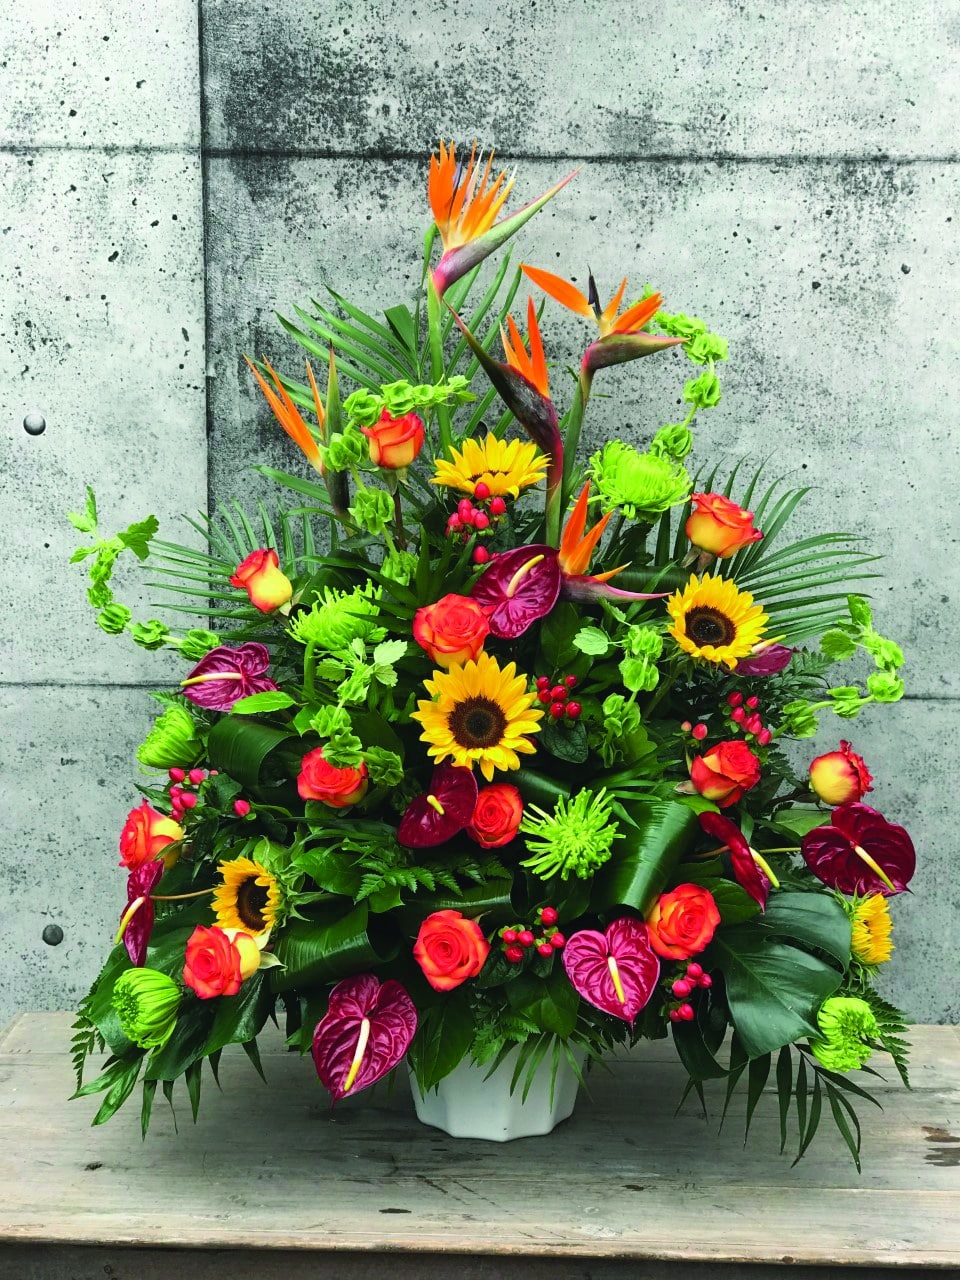 The Watering Can | A large bright side spray made with birds of paradise, bells of Ireland, sunflowers, green mums, burgundy anthuriums, orange roses, and red hypericum backed by greenery.